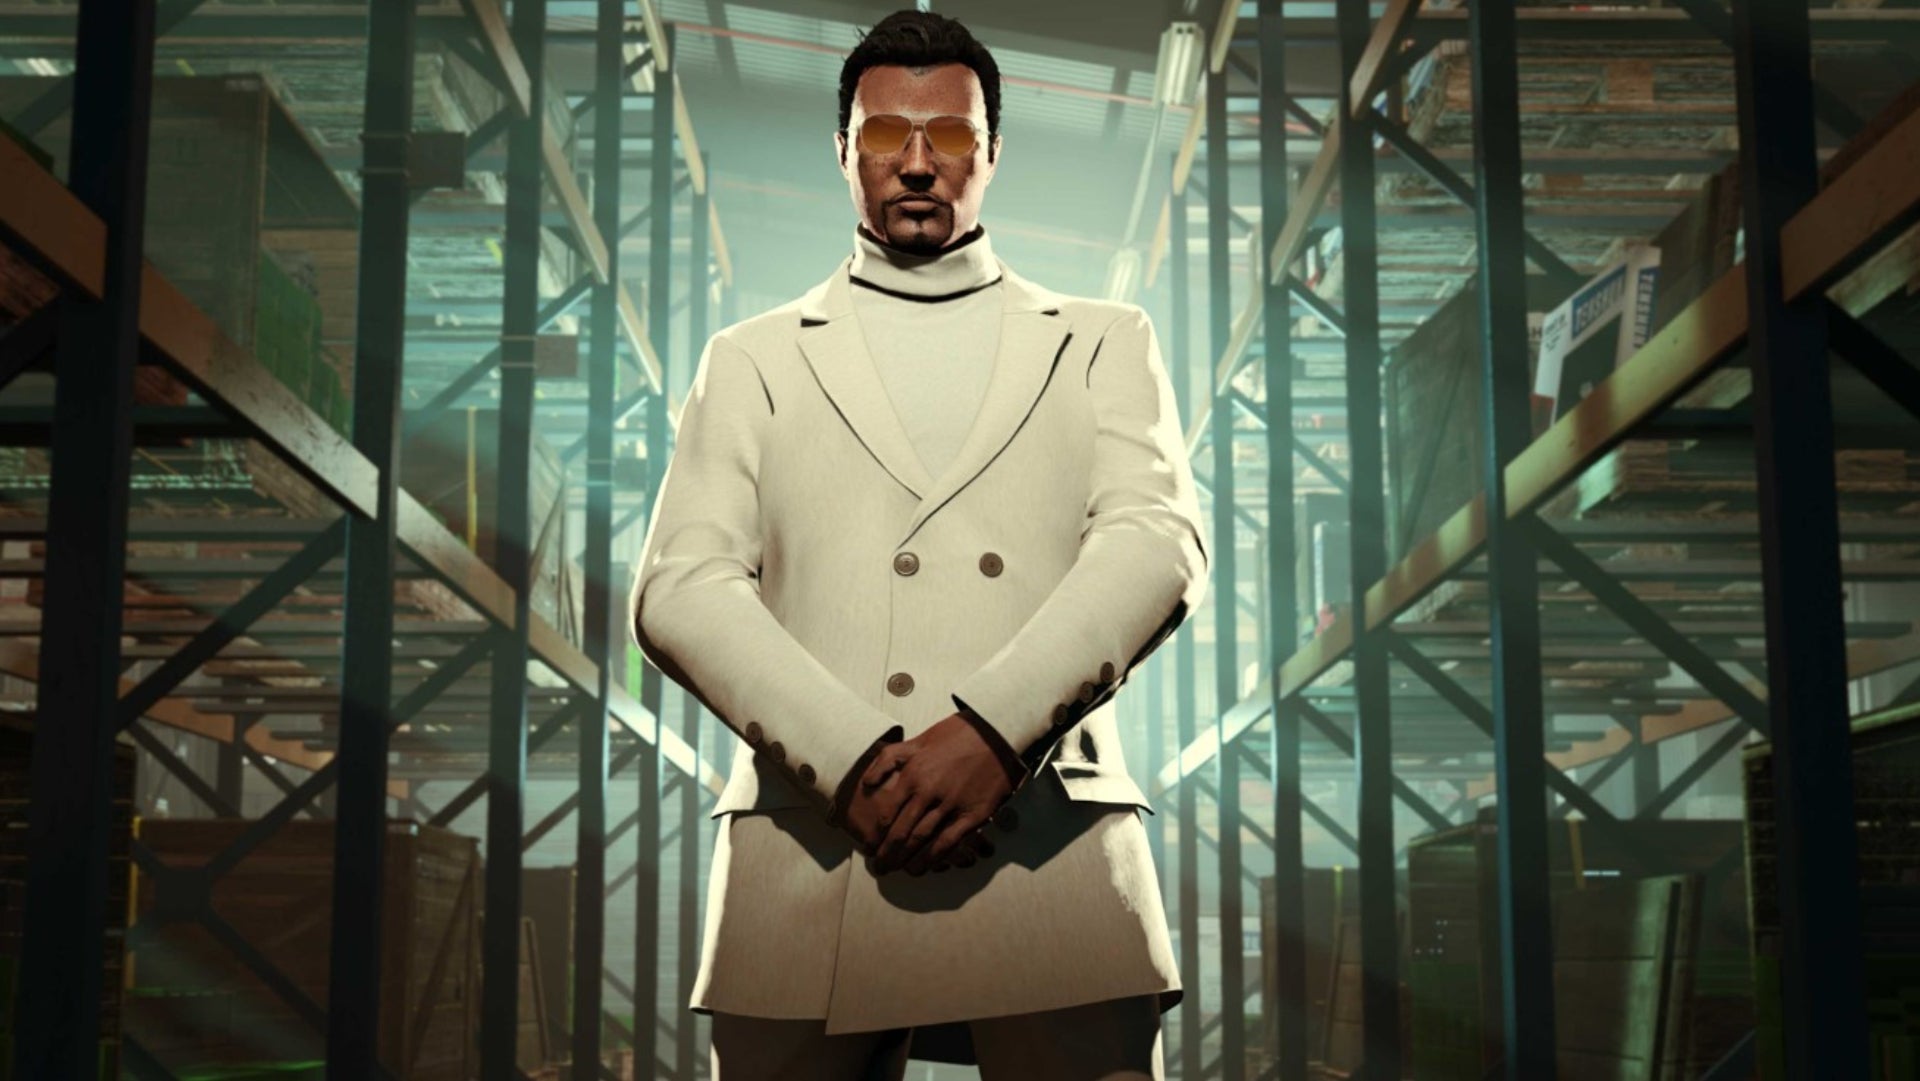 GTA Online, Rockstar Newswire image of a character in a warehouse.